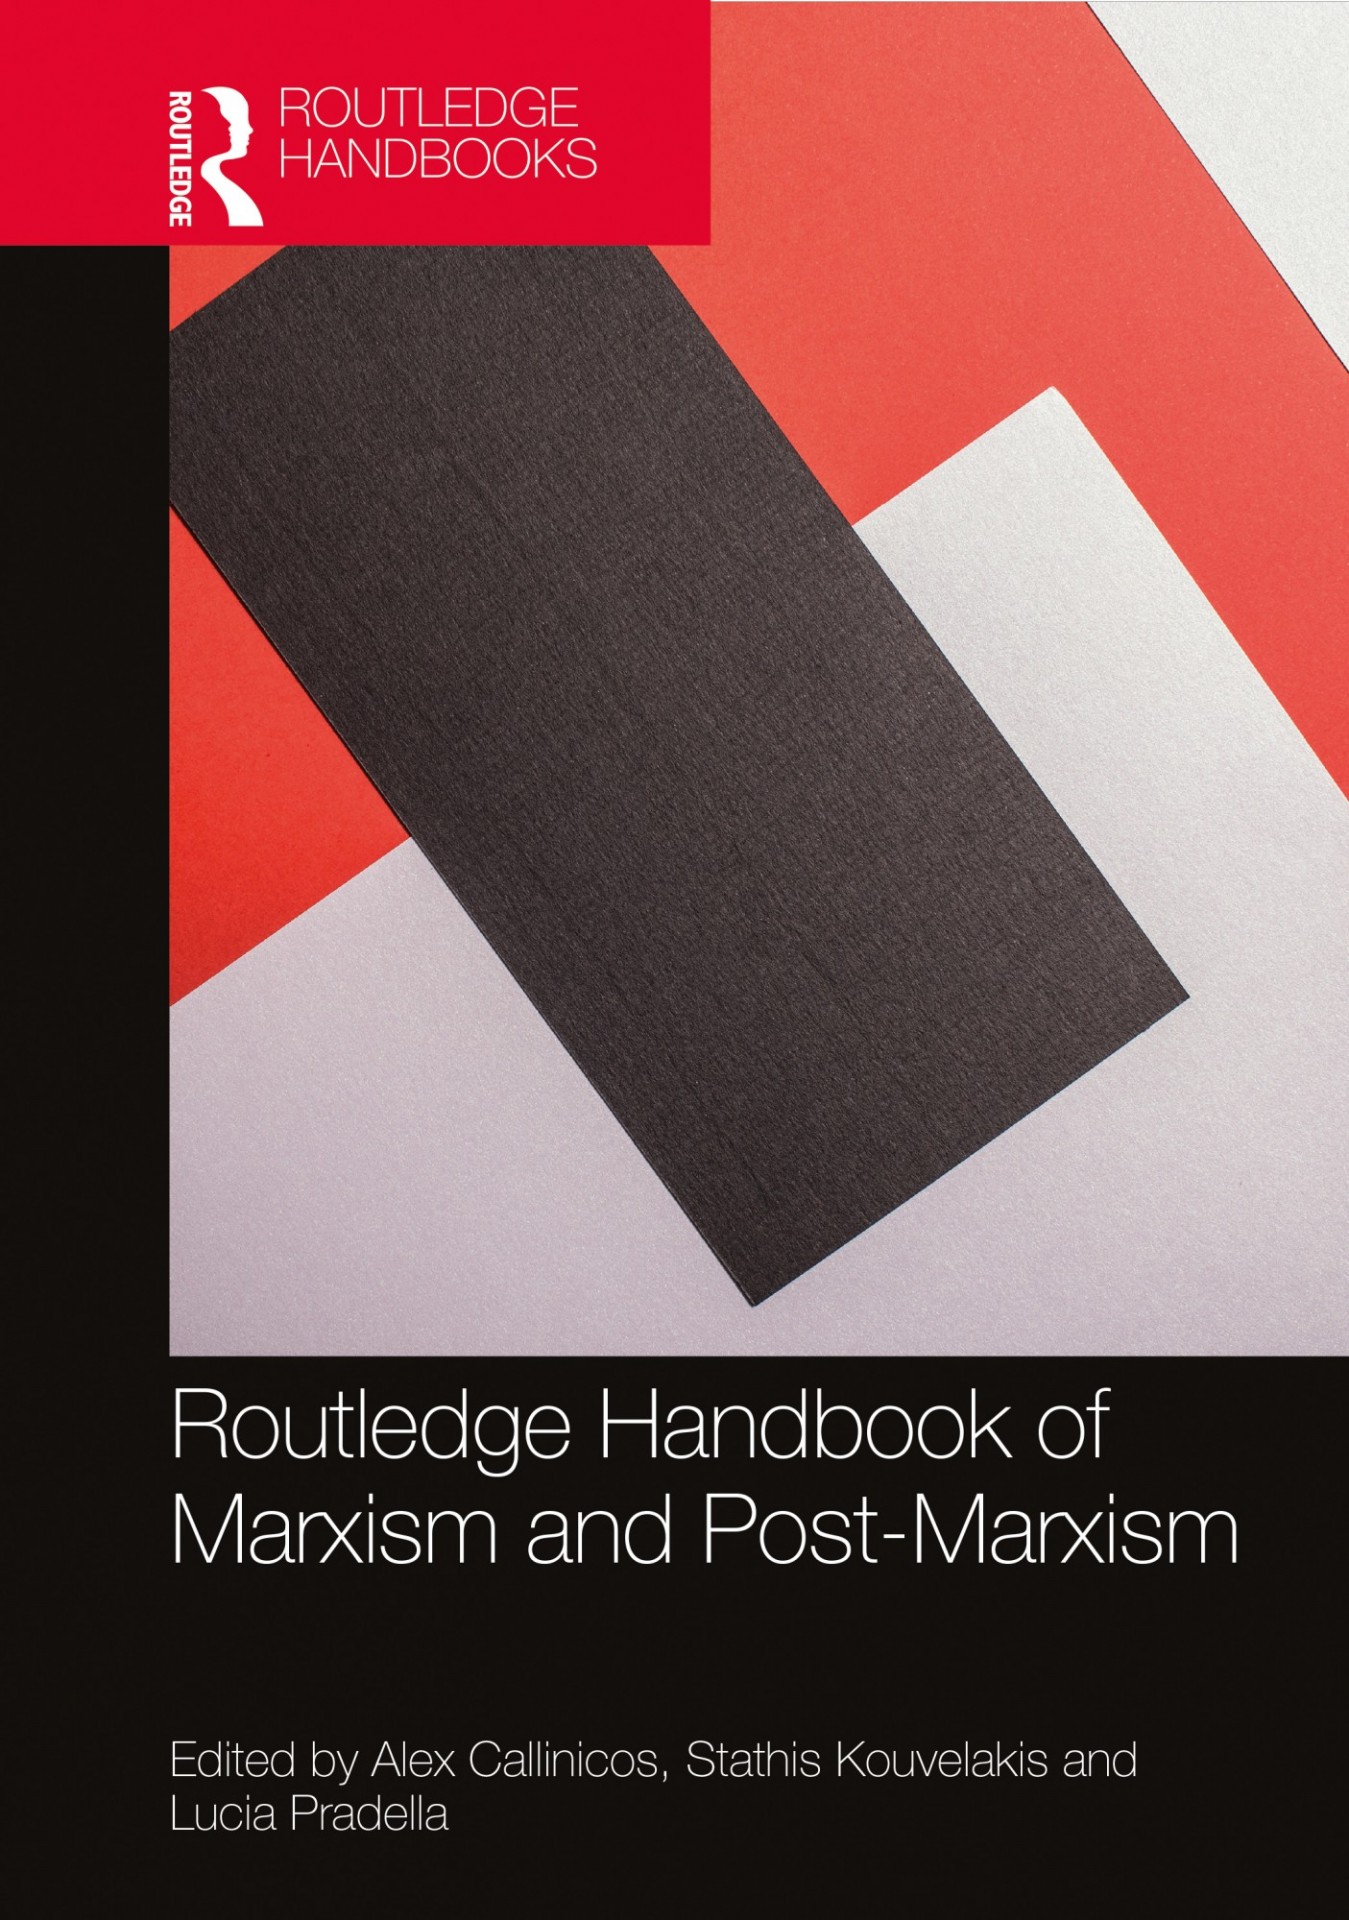 Routledge Handbook of Marxism and Post-Marxism